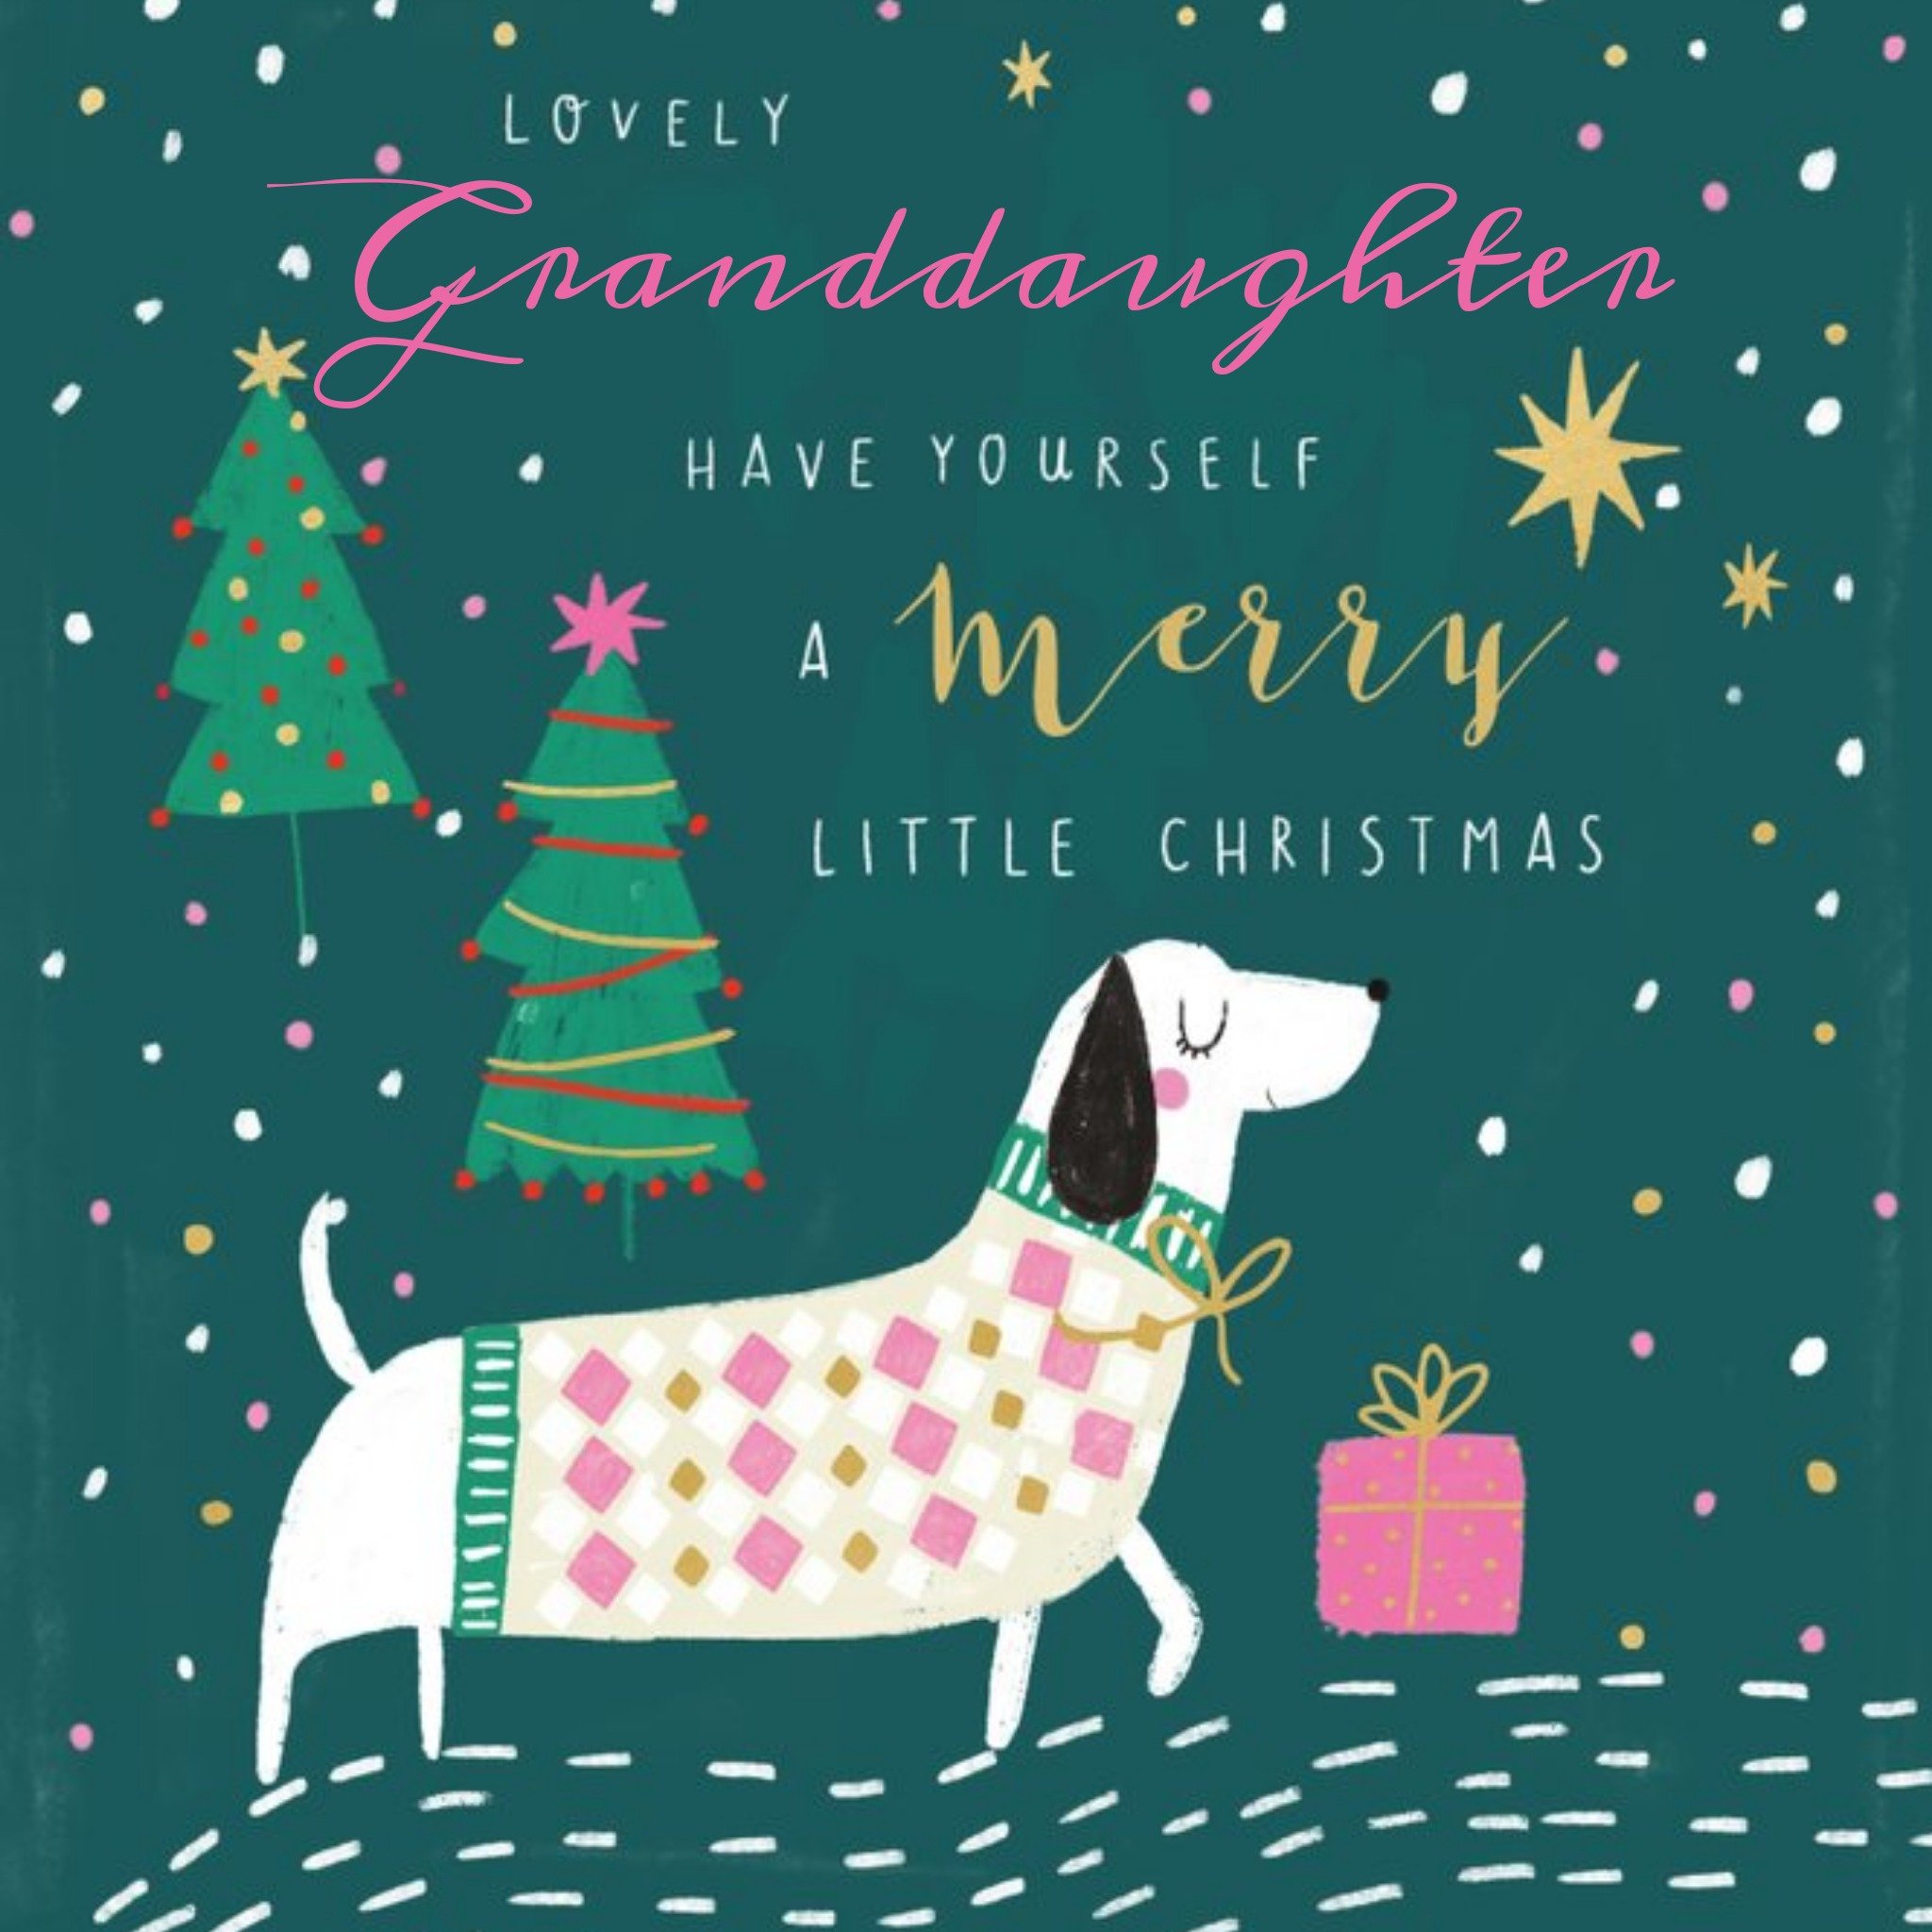 Moonpig Pigment Cute Dog Lovely Granddaughter Christmas Card, Square